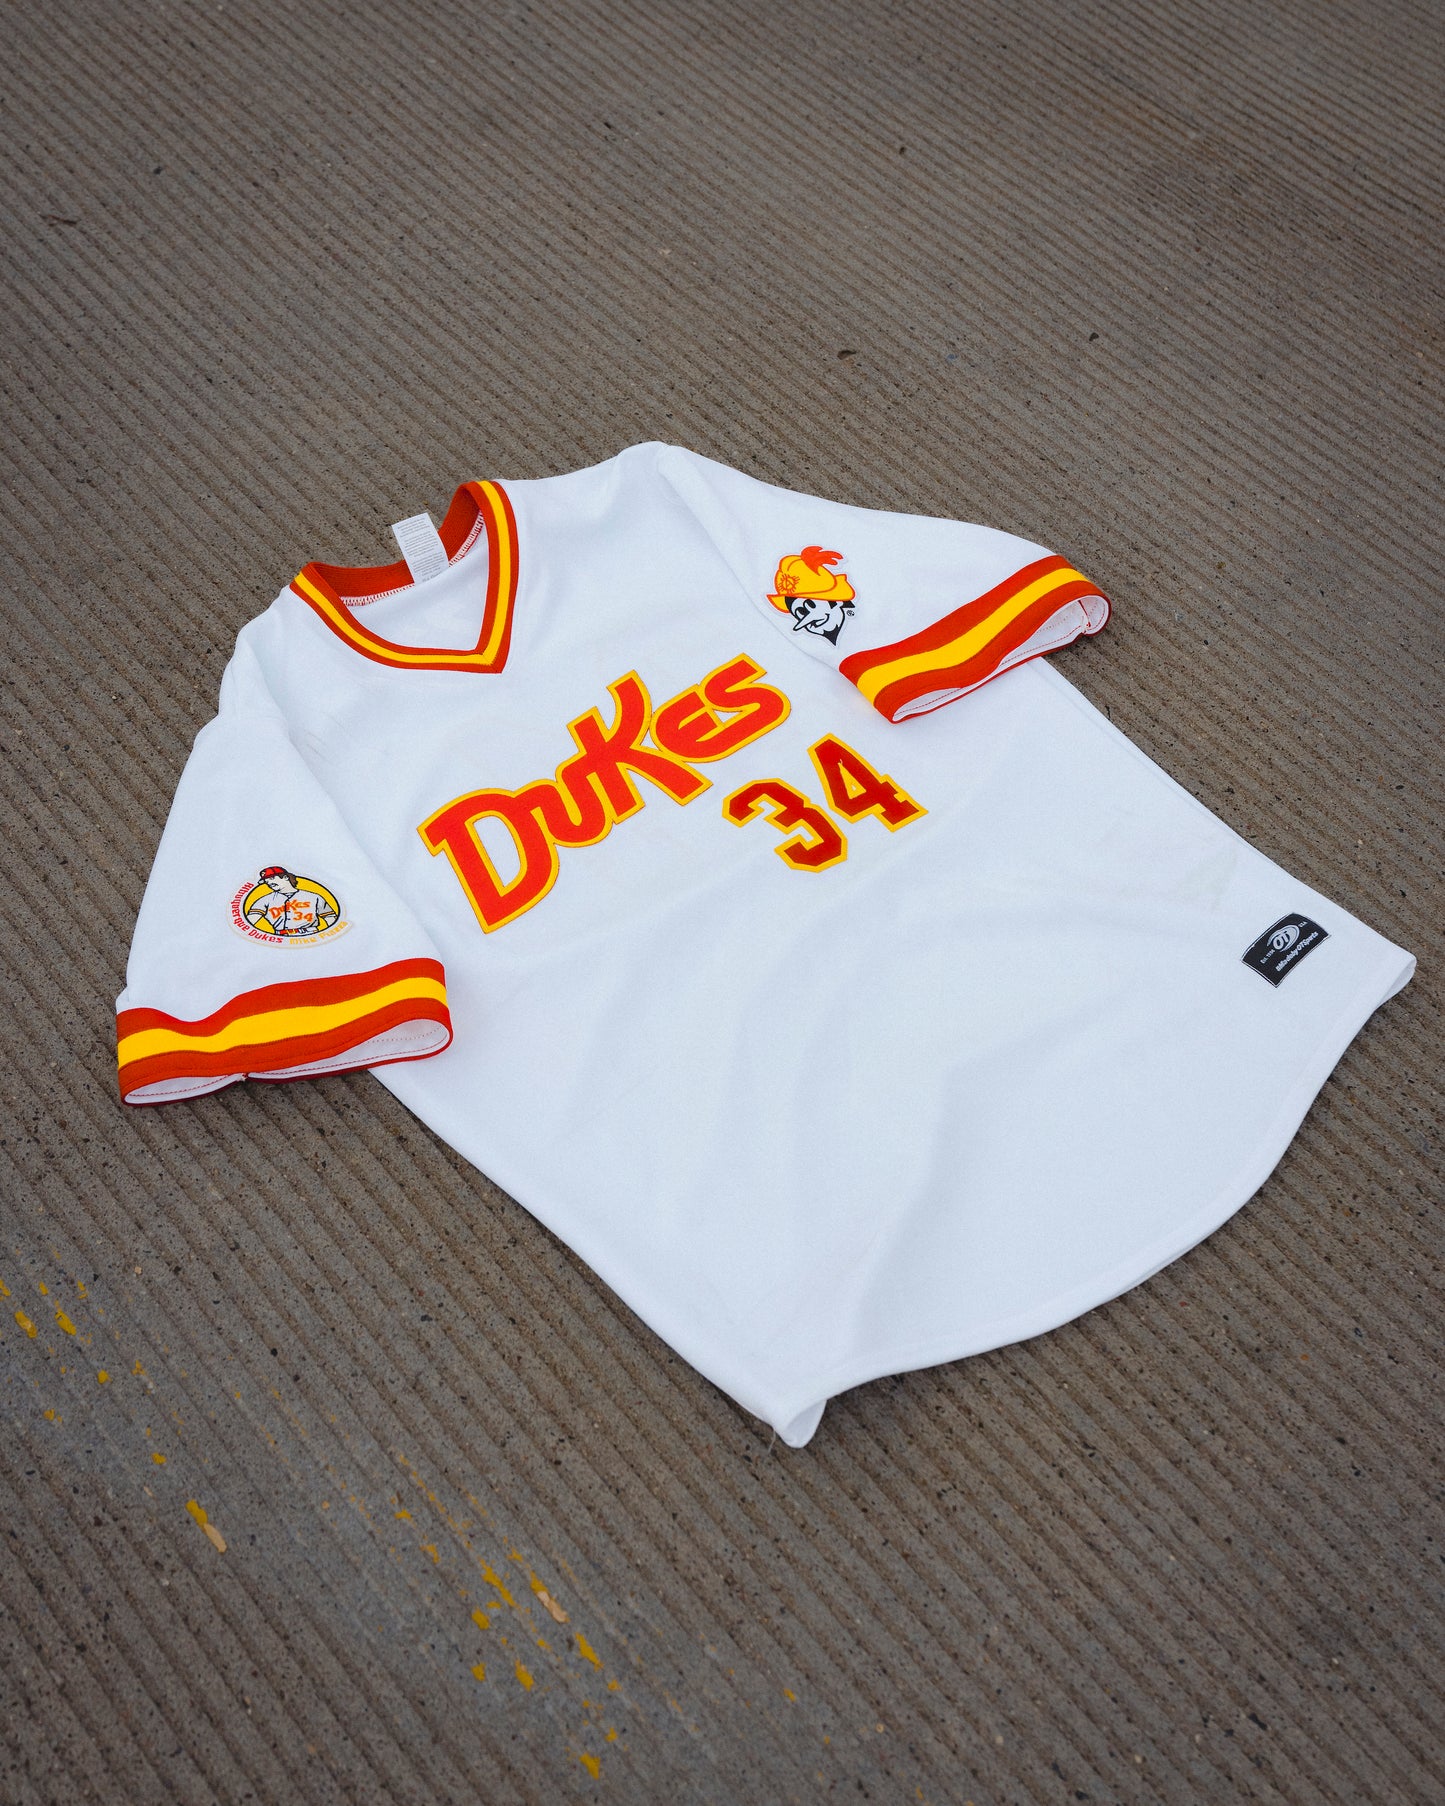 Albuquerque Dukes LIMITED Mike Piazza White V-Neck Jersey